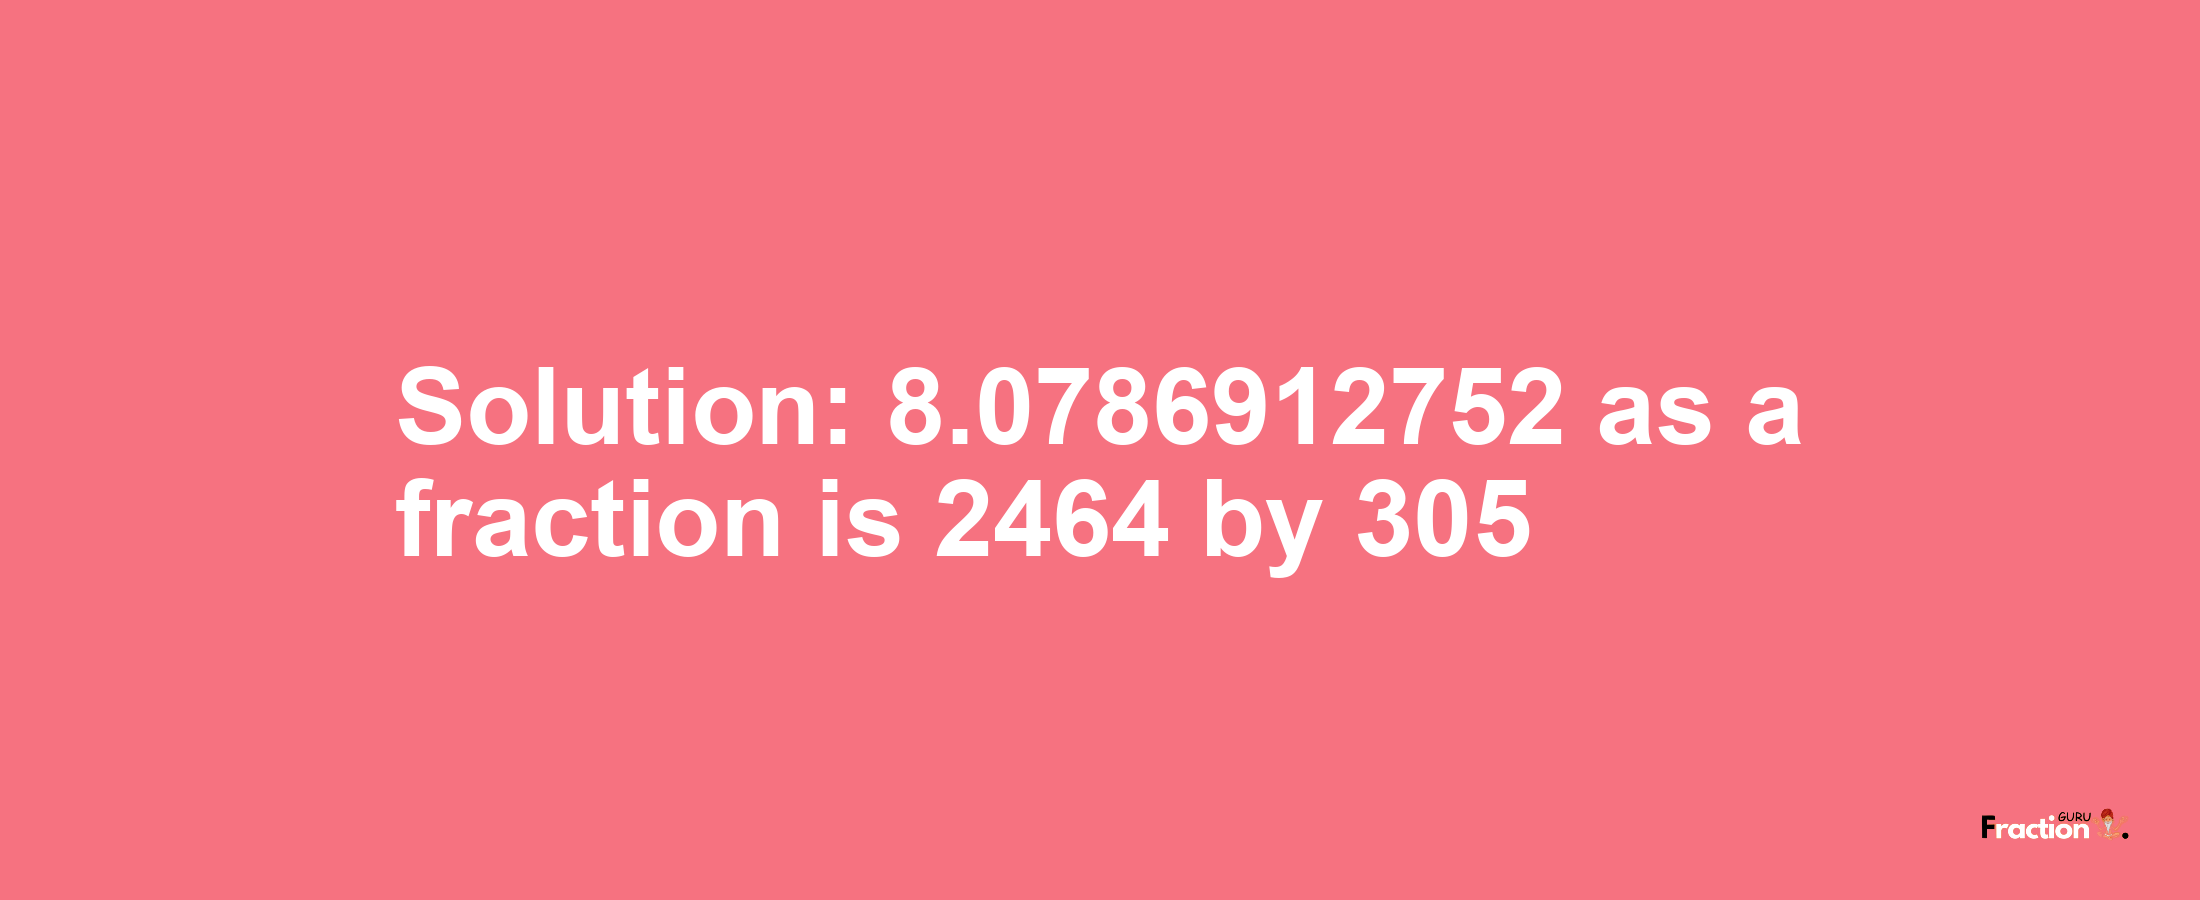 Solution:8.0786912752 as a fraction is 2464/305